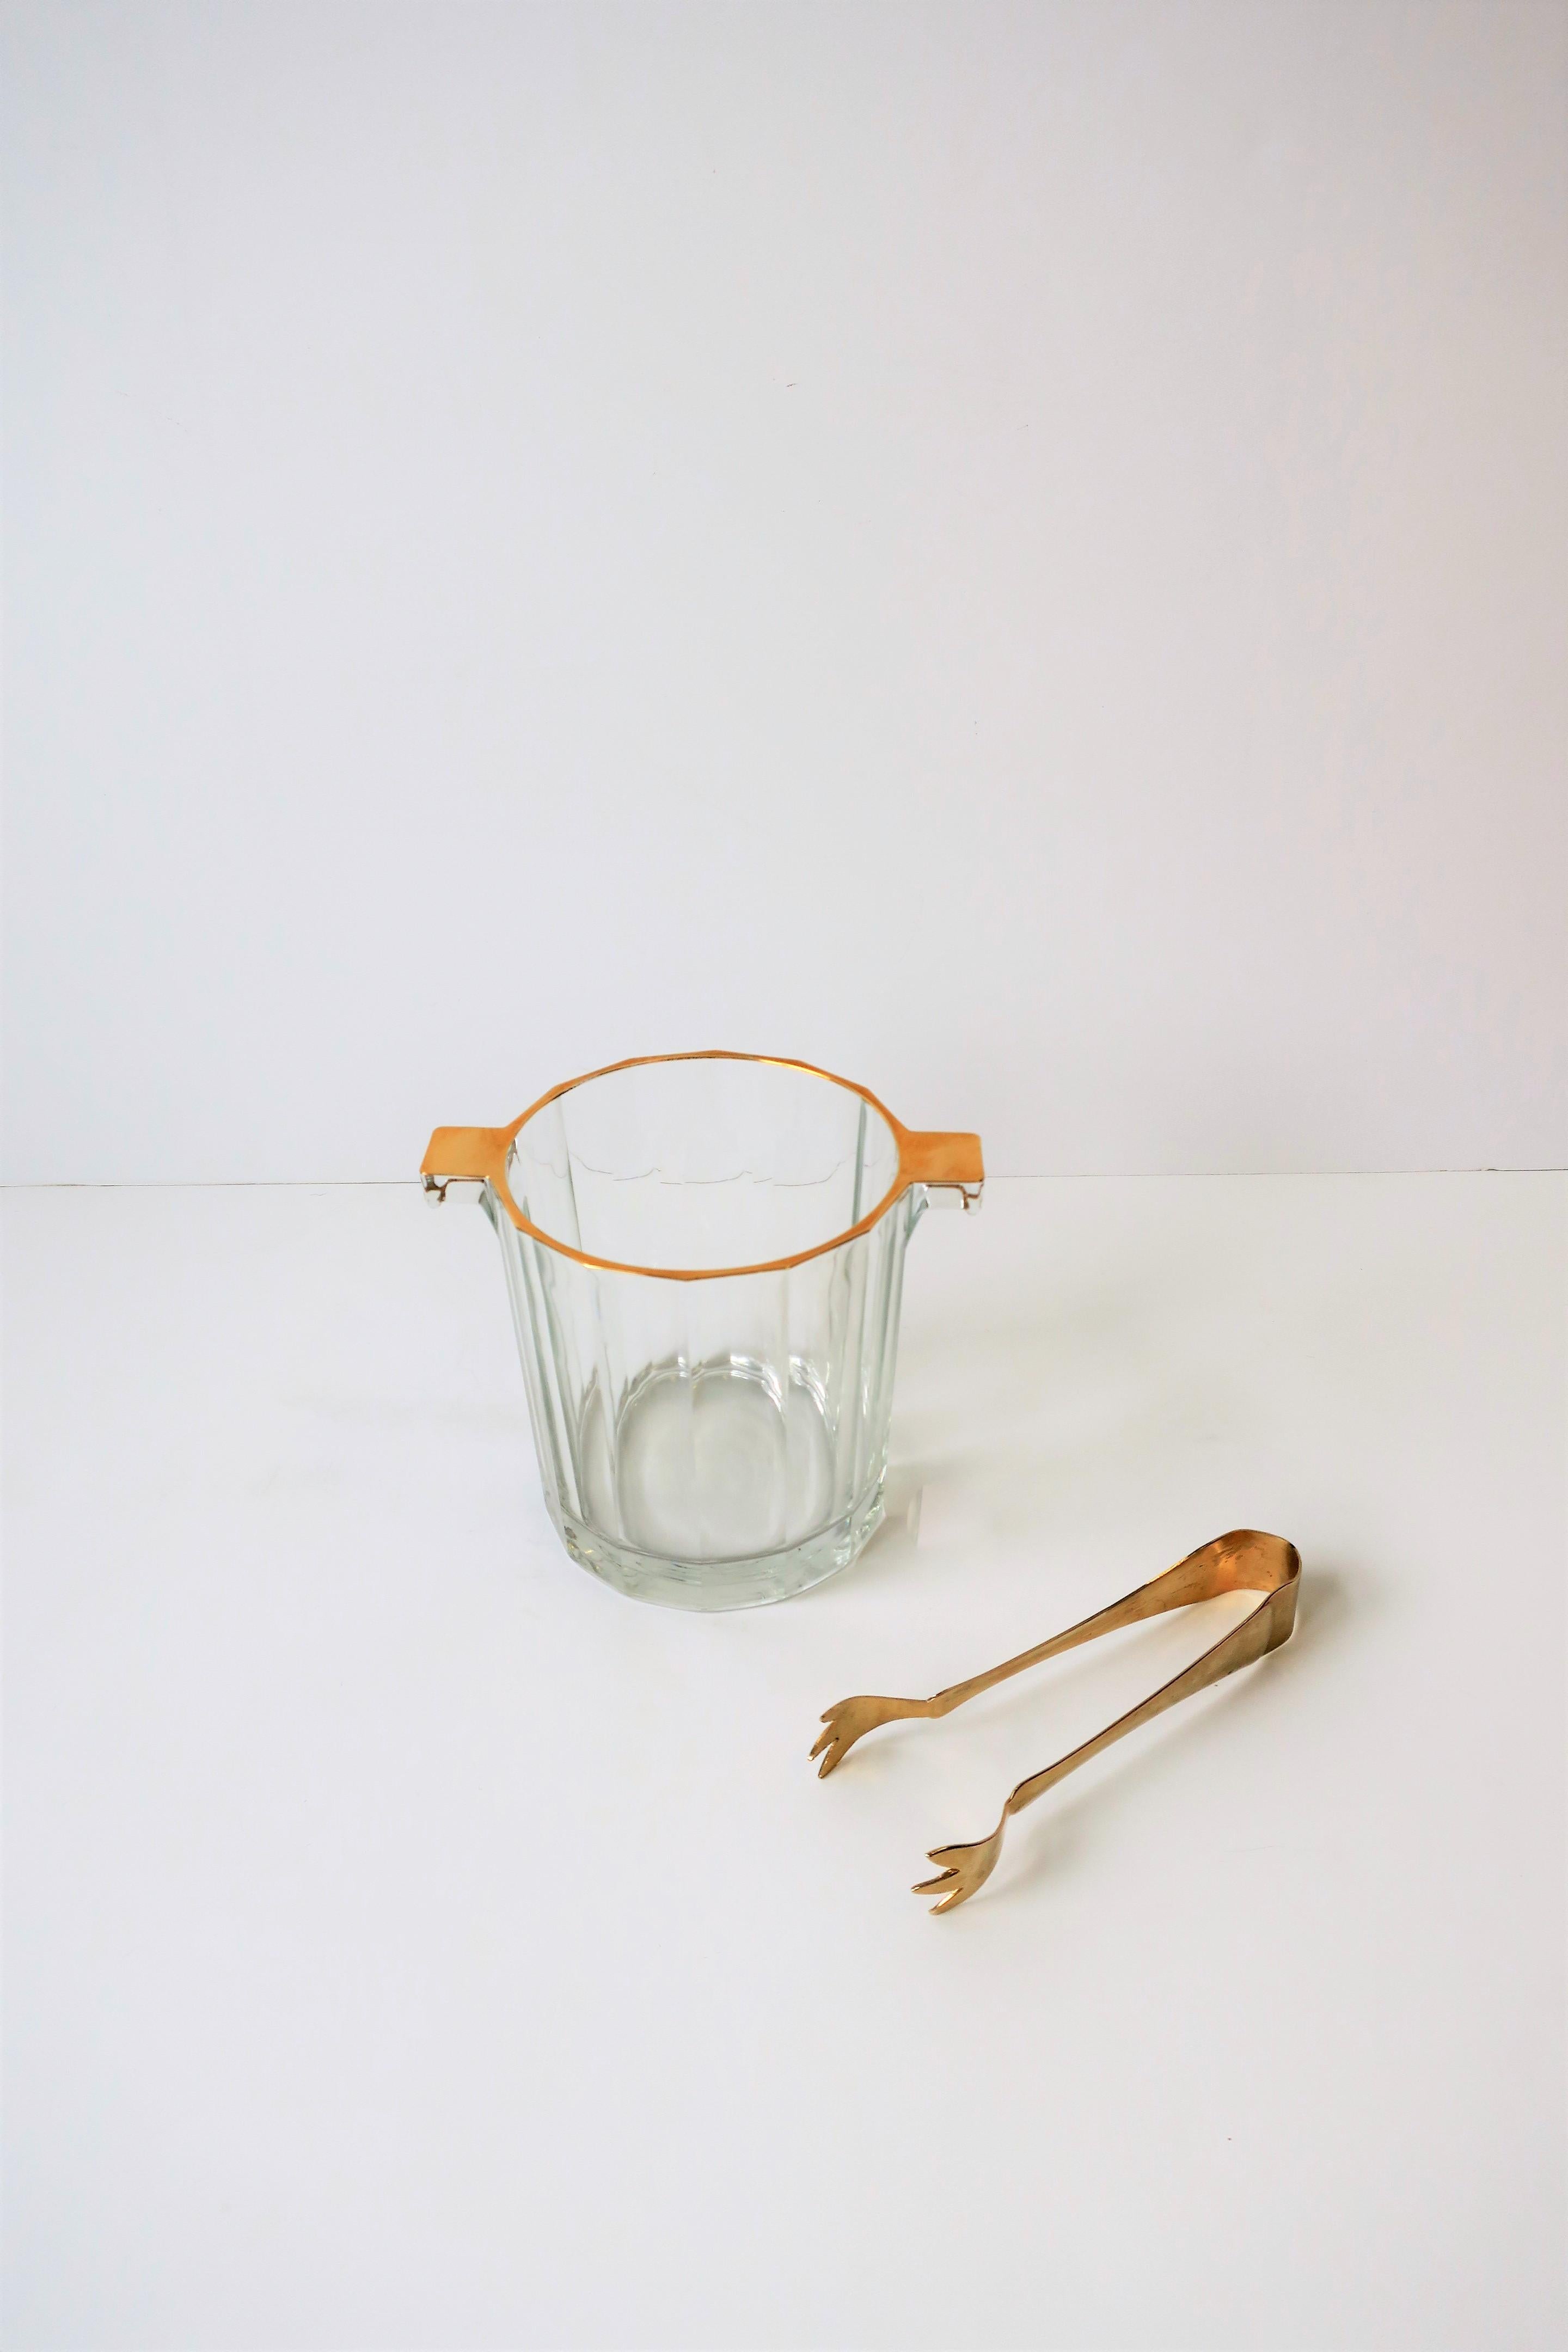 A beautifully made Italian crystal ice bucket with gold-tone tongs, in the Hollywood Regency style, circa 20th Century, Italy. Piece is well preserved as an 'ice' bucket with tongs to grab ice cubes as show in images. Piece can alternatively serve